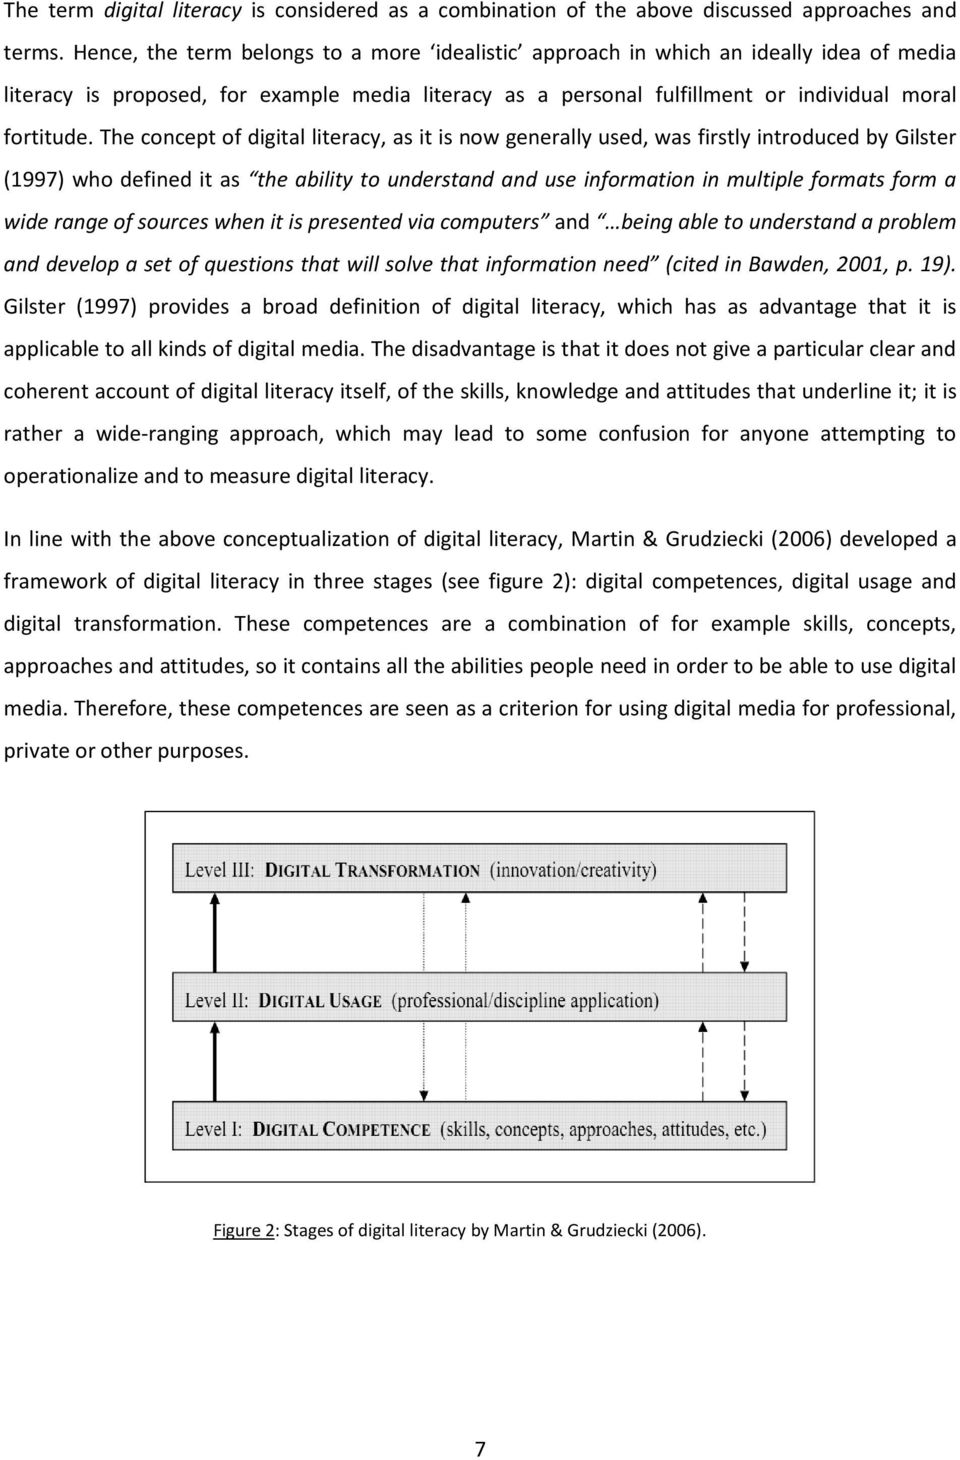 The concept of digital literacy, as it is now generally used, was firstly introduced by Gilster (1997) who defined it as the ability to understand and use information in multiple formats form a wide